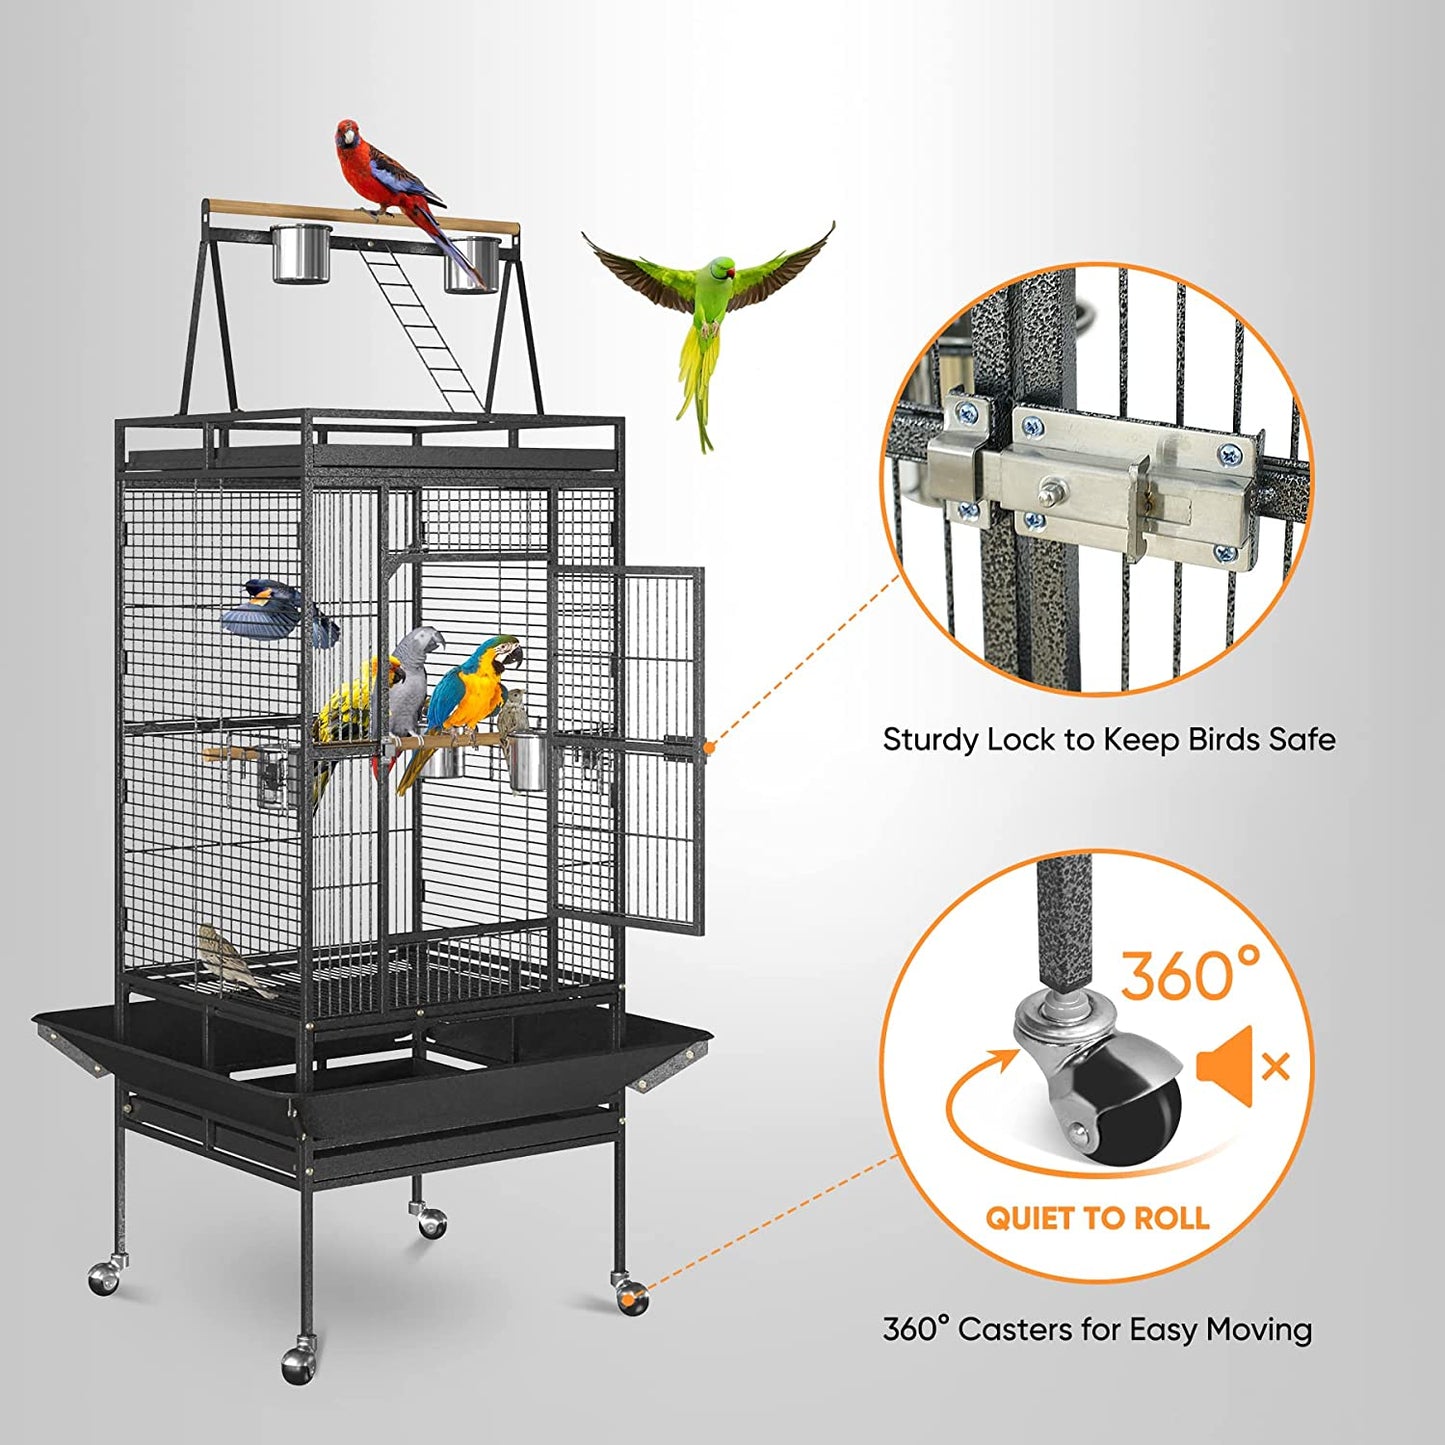 68-Inch Birdcage, Playtop Parrot Cage, Wrought Iron Bird Cage with Rolling Stand, Heavy-Duty Pet Bird House for Parrot Cockatiel Cockatoo Parakeet Macaw Finches, Black